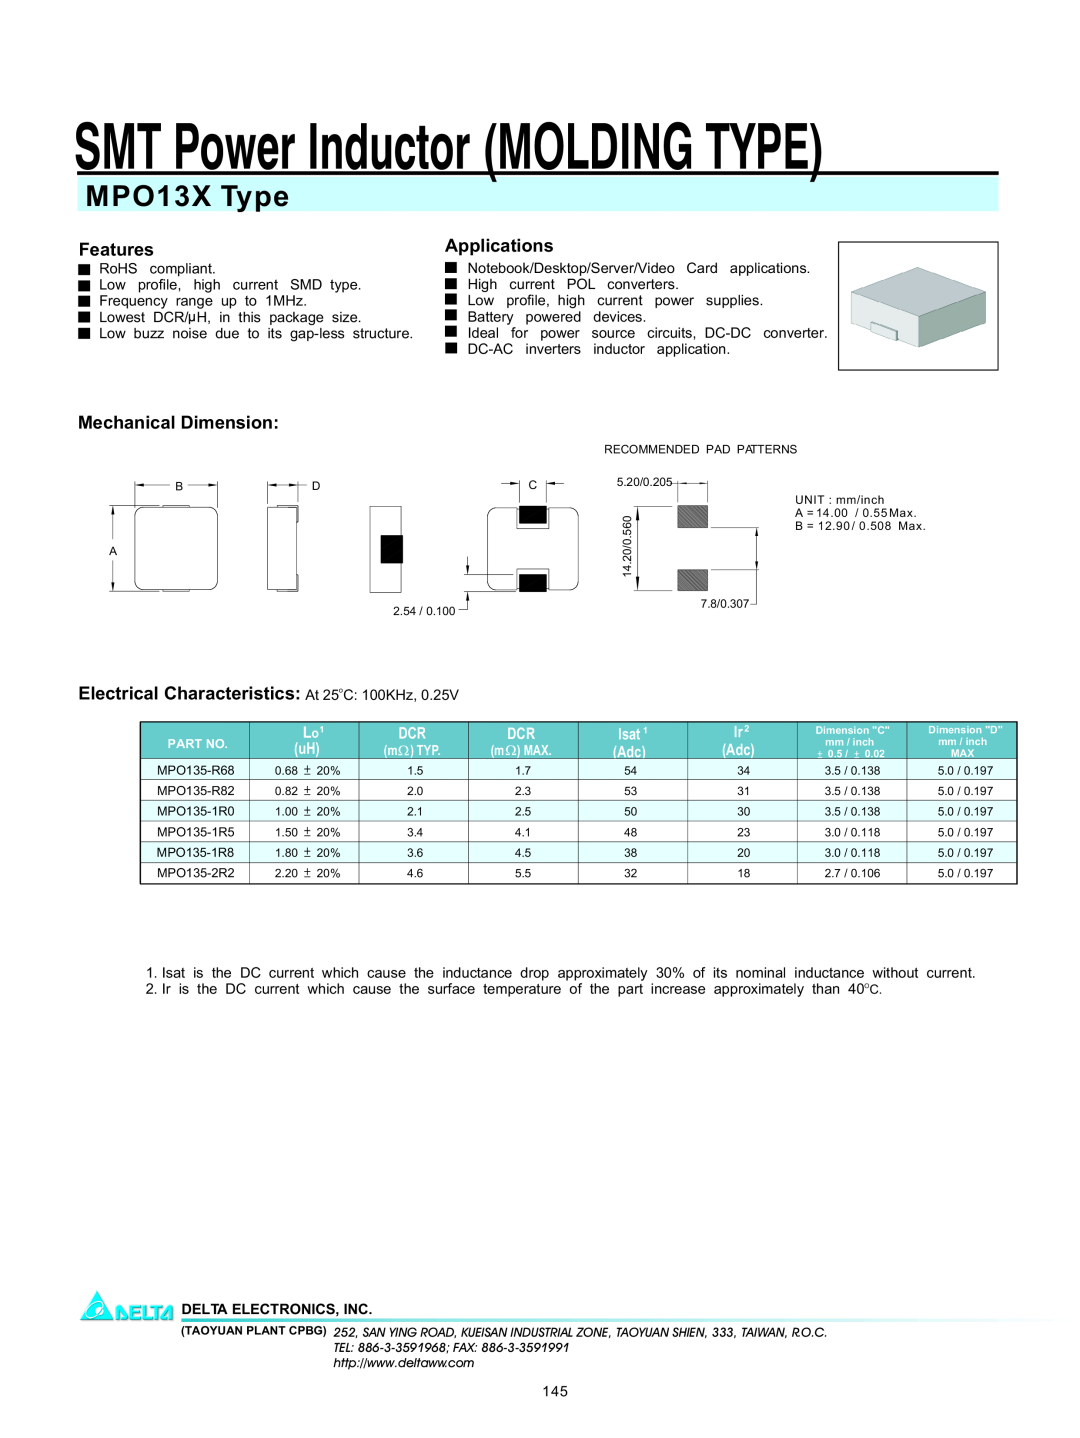 Delta Electronics manual SMT Power Inductor MOLDING TYPE, MPO13X Type, Features, Applications, Mechanical Dimension 